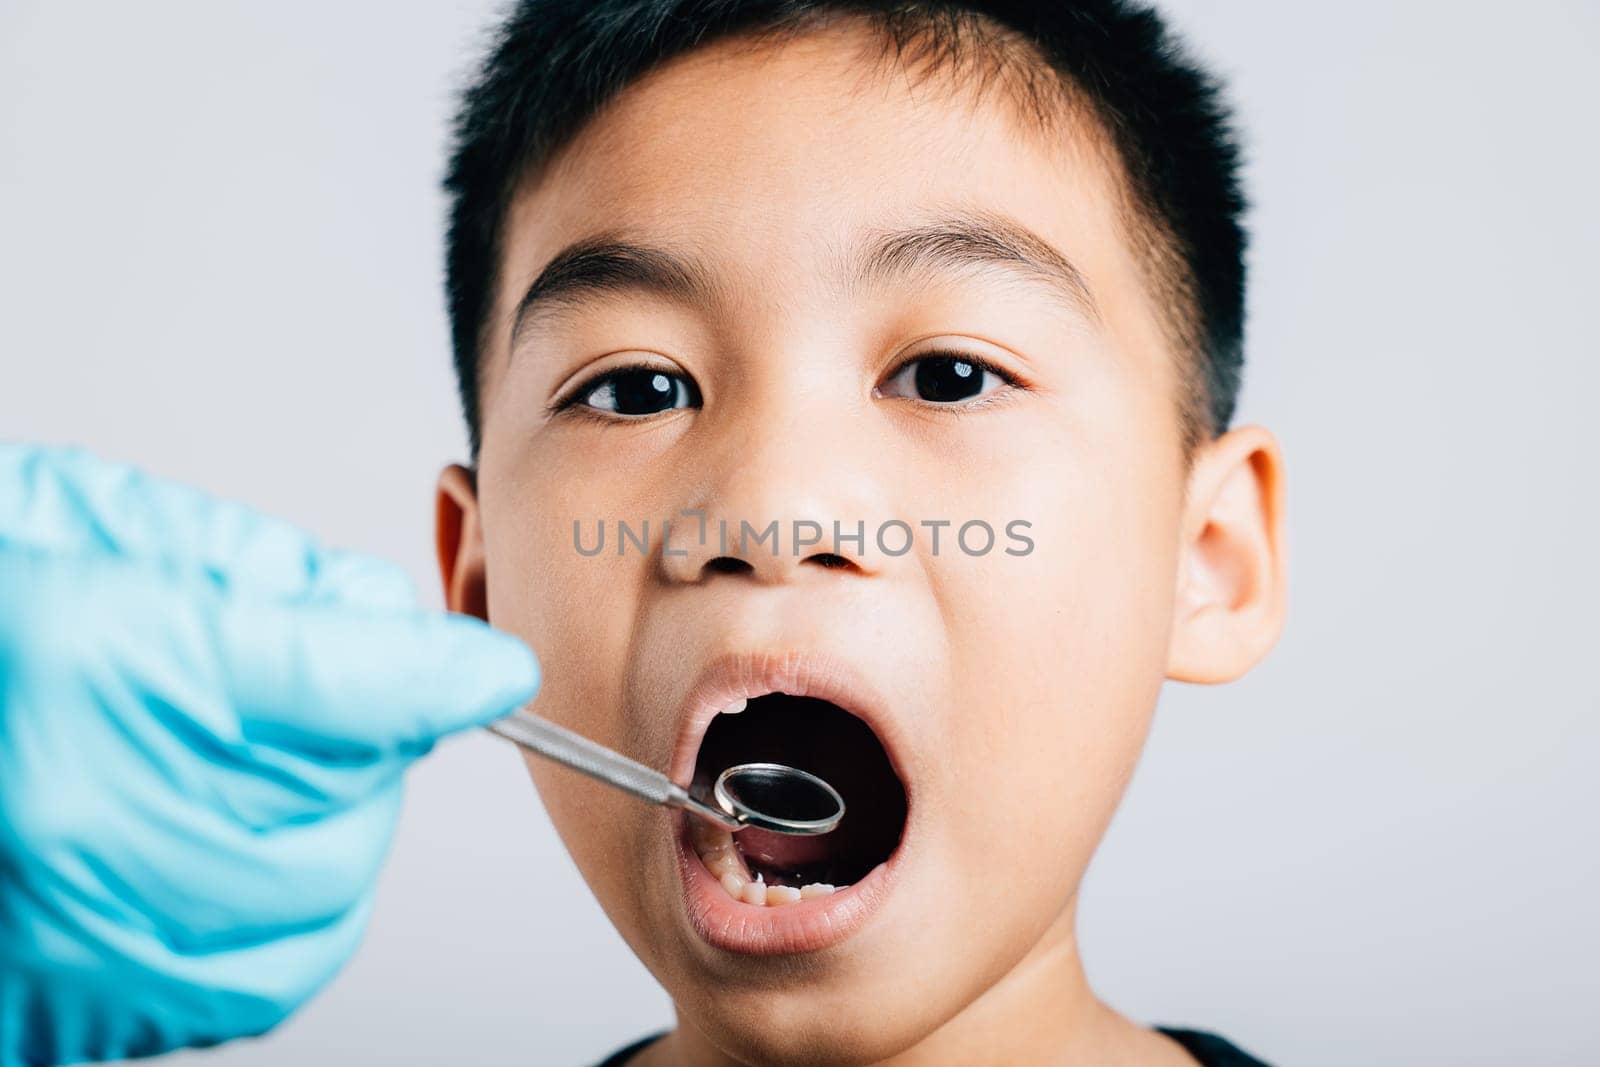 In a dental office a pediatric dentist examines a child's mouth after extraction of a loose milk tooth. Dental instruments aid in examination process. Doctor uses mouth mirror to checking teeth cavity by Sorapop